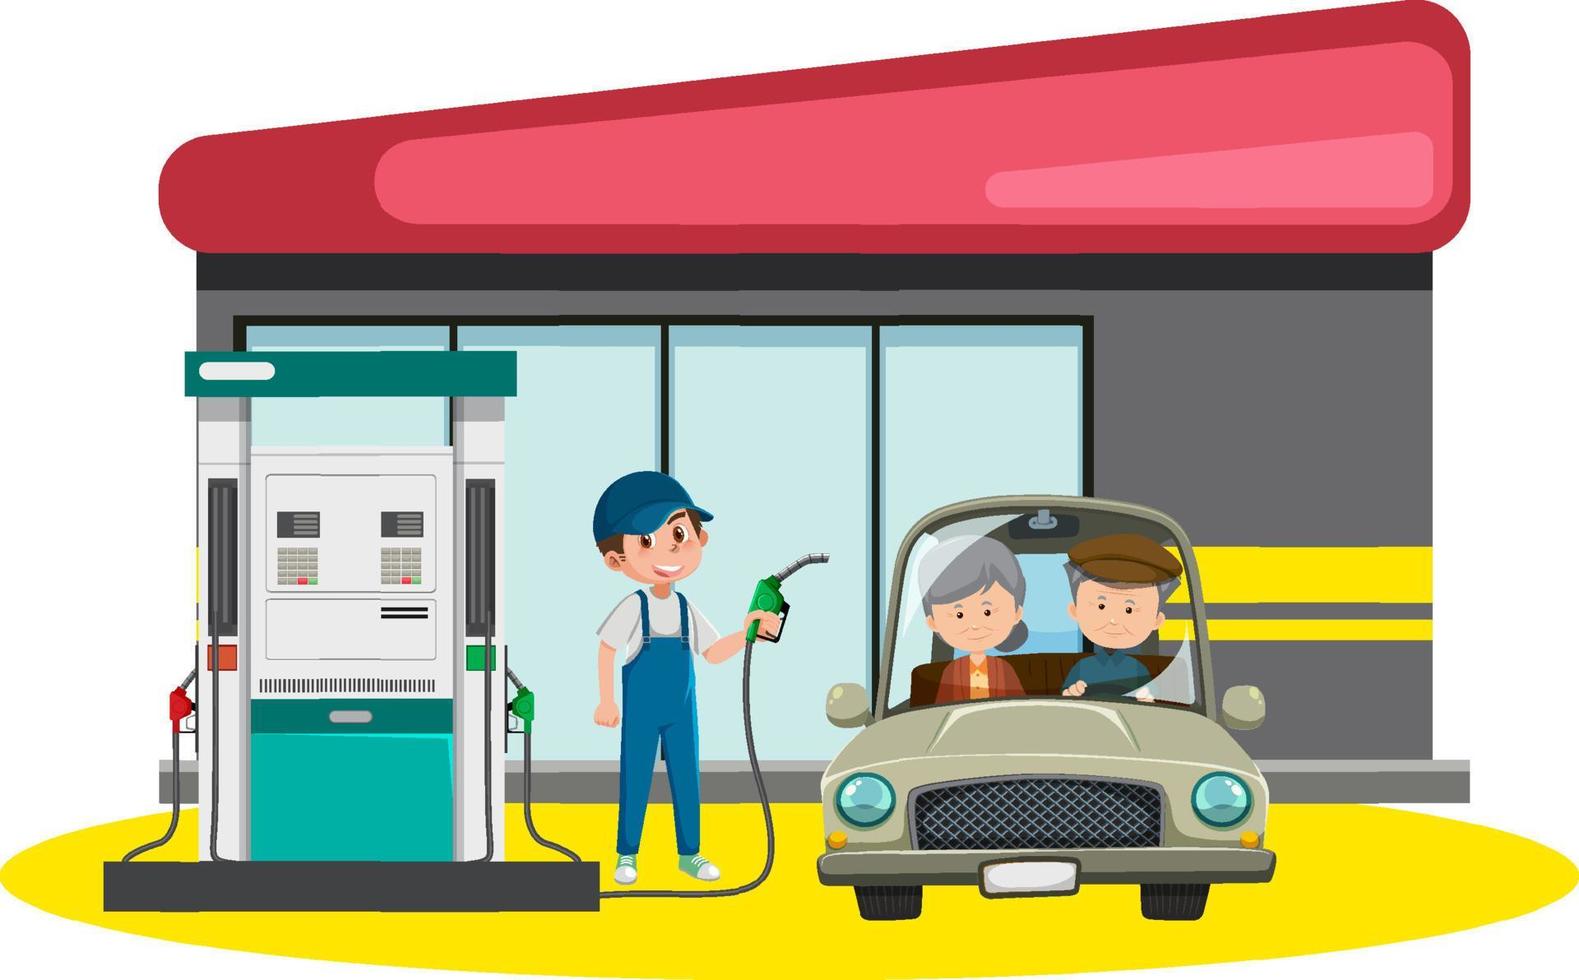 Gas station in cartoon style vector